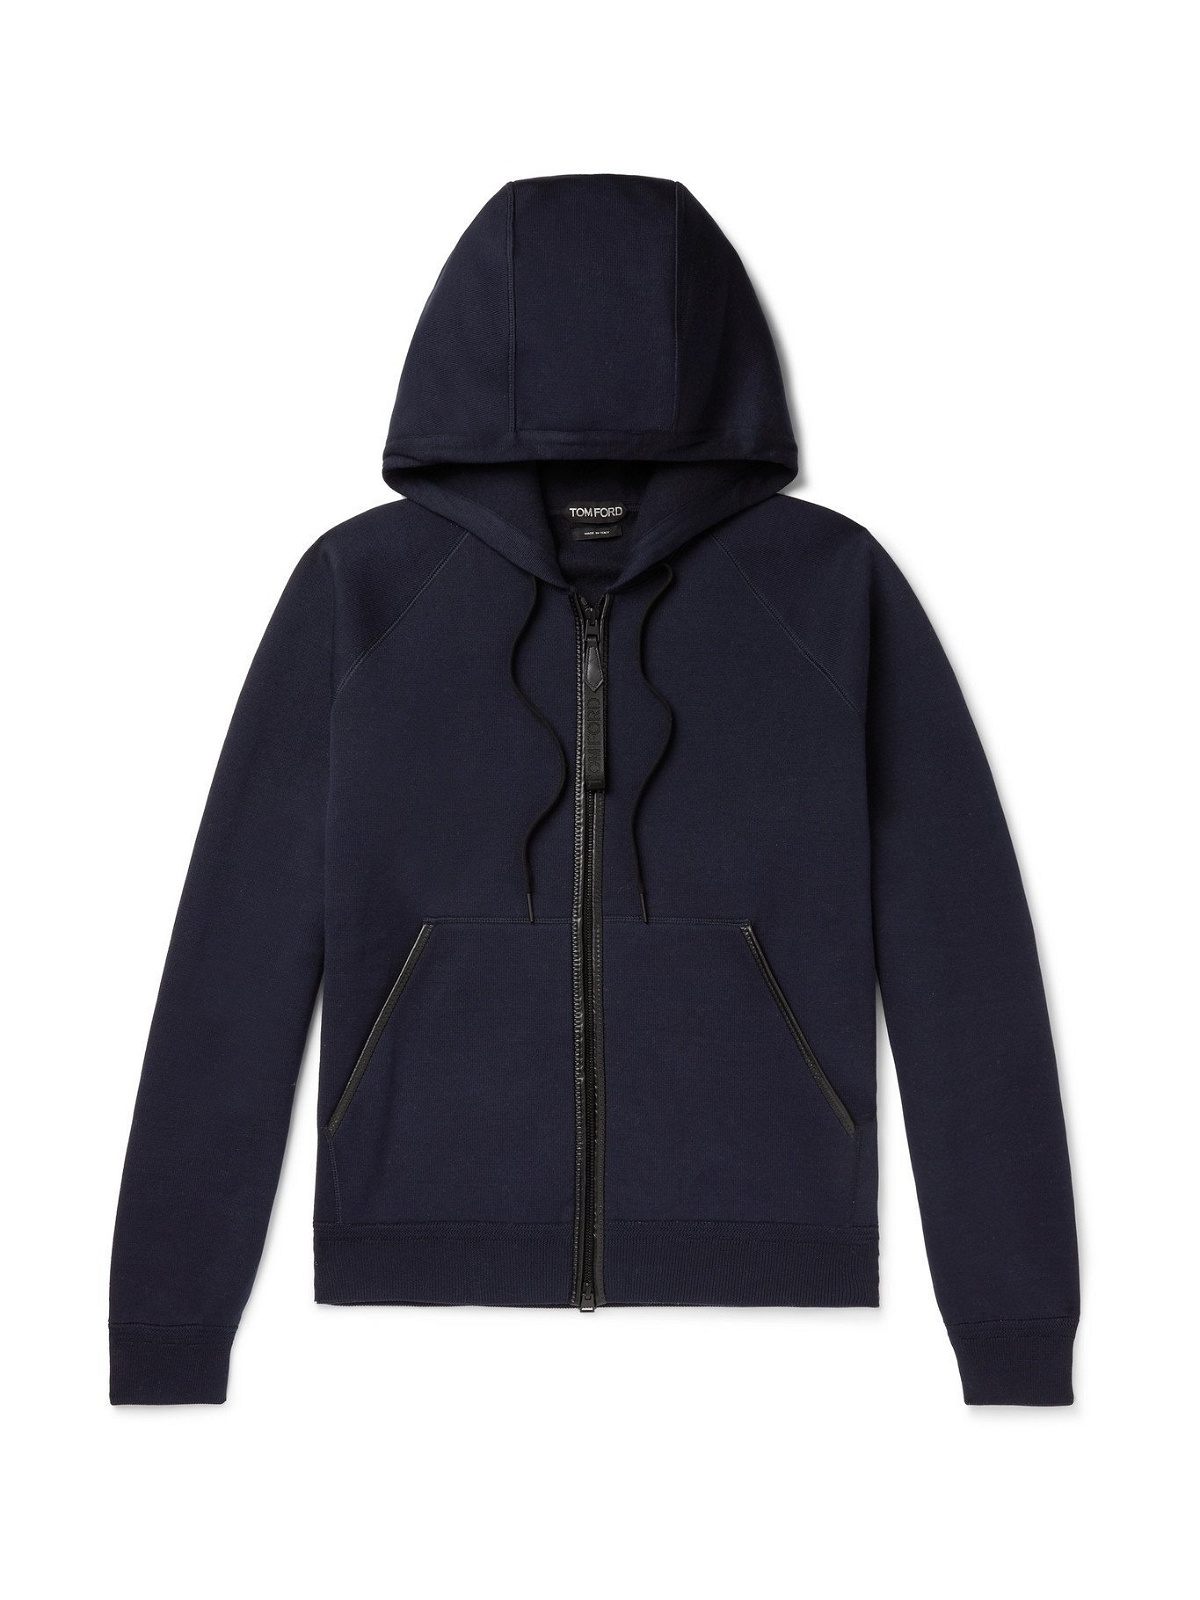 TOM FORD - Leather-Trimmed Double-Faced Cotton-Blend Jersey Zip-Up ...